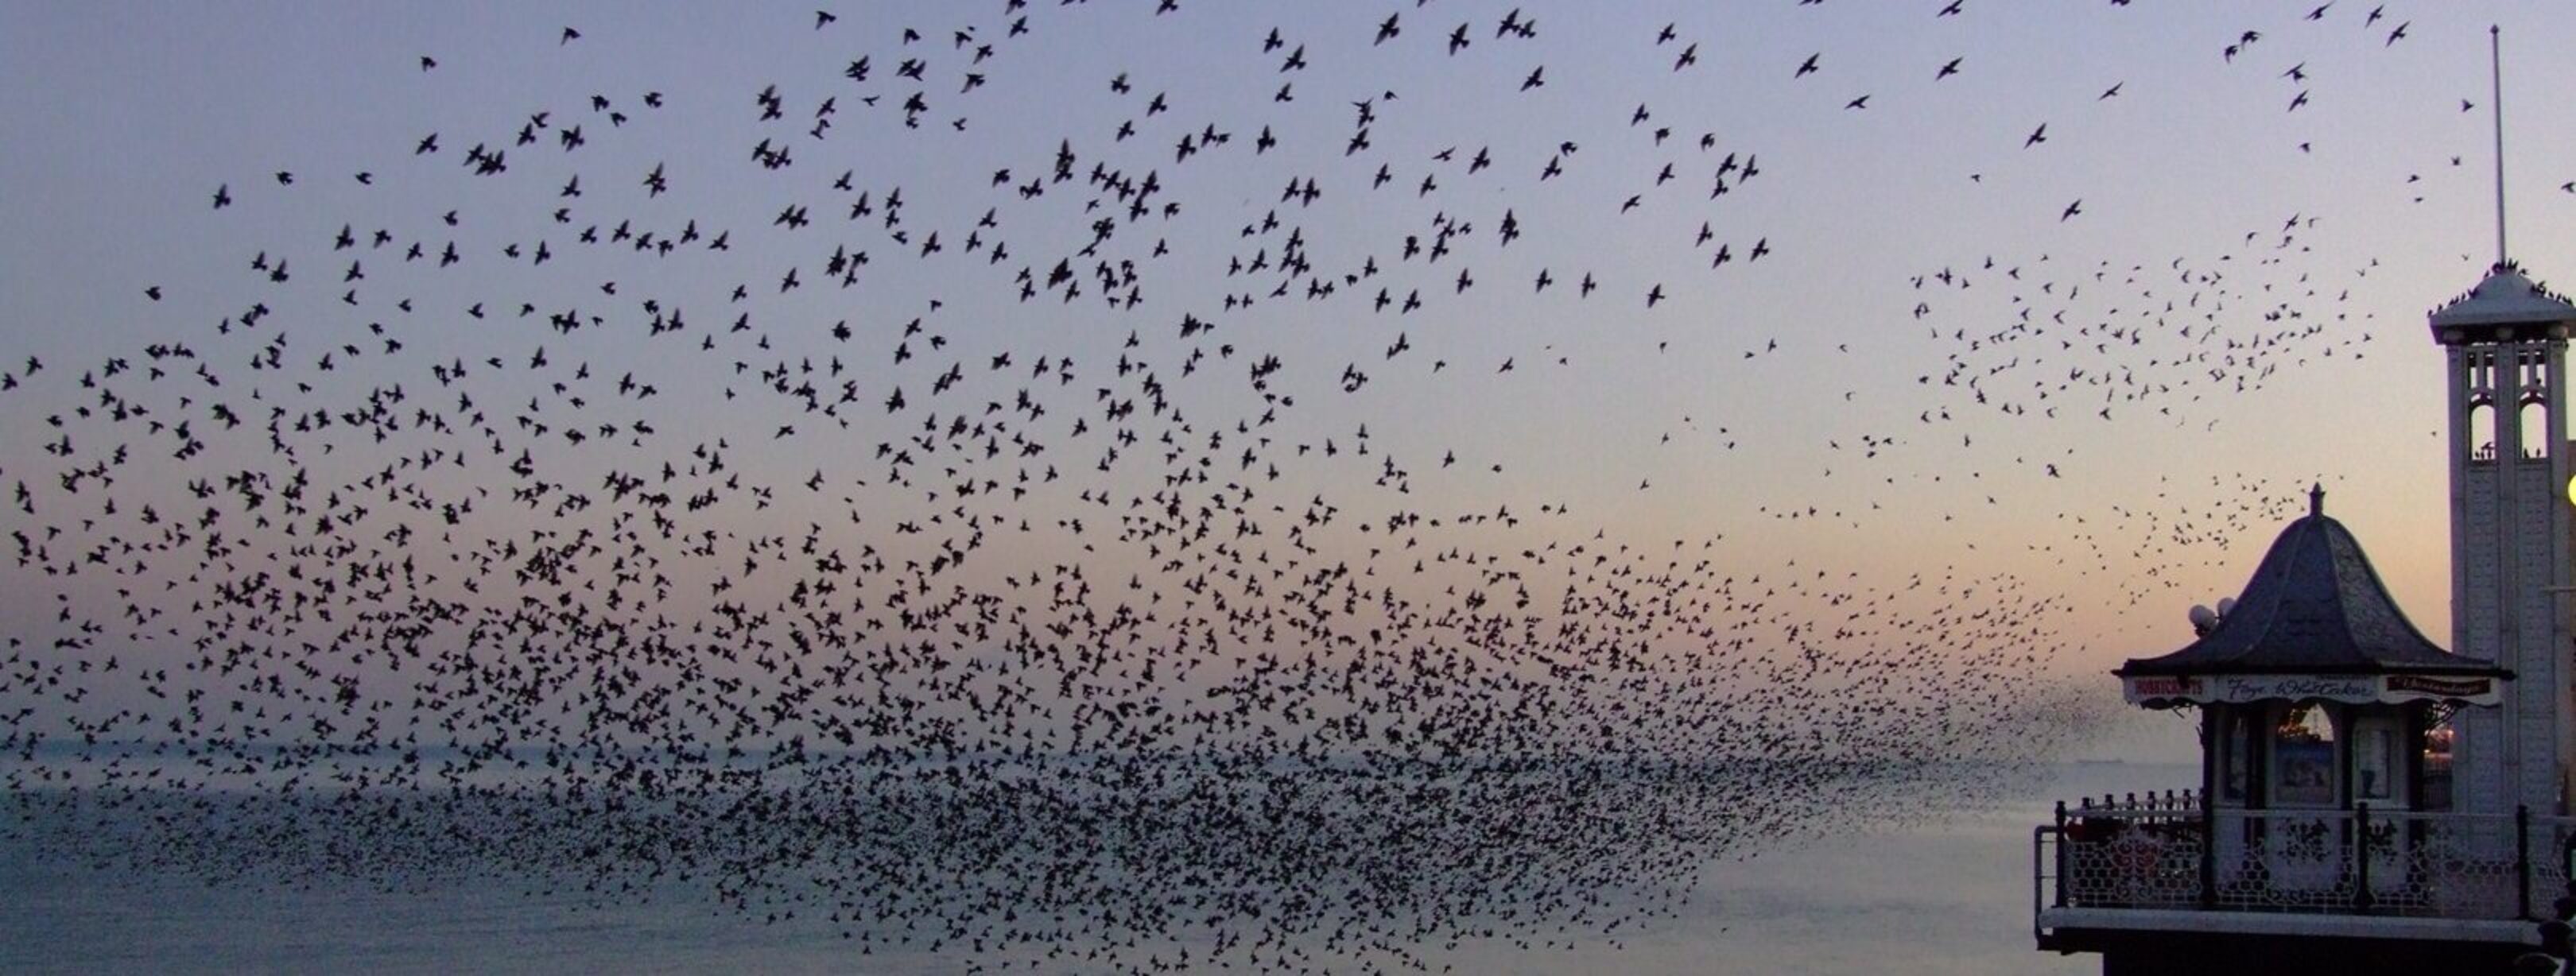 1620-Starling twilight_by Les Chatfield via Flickr